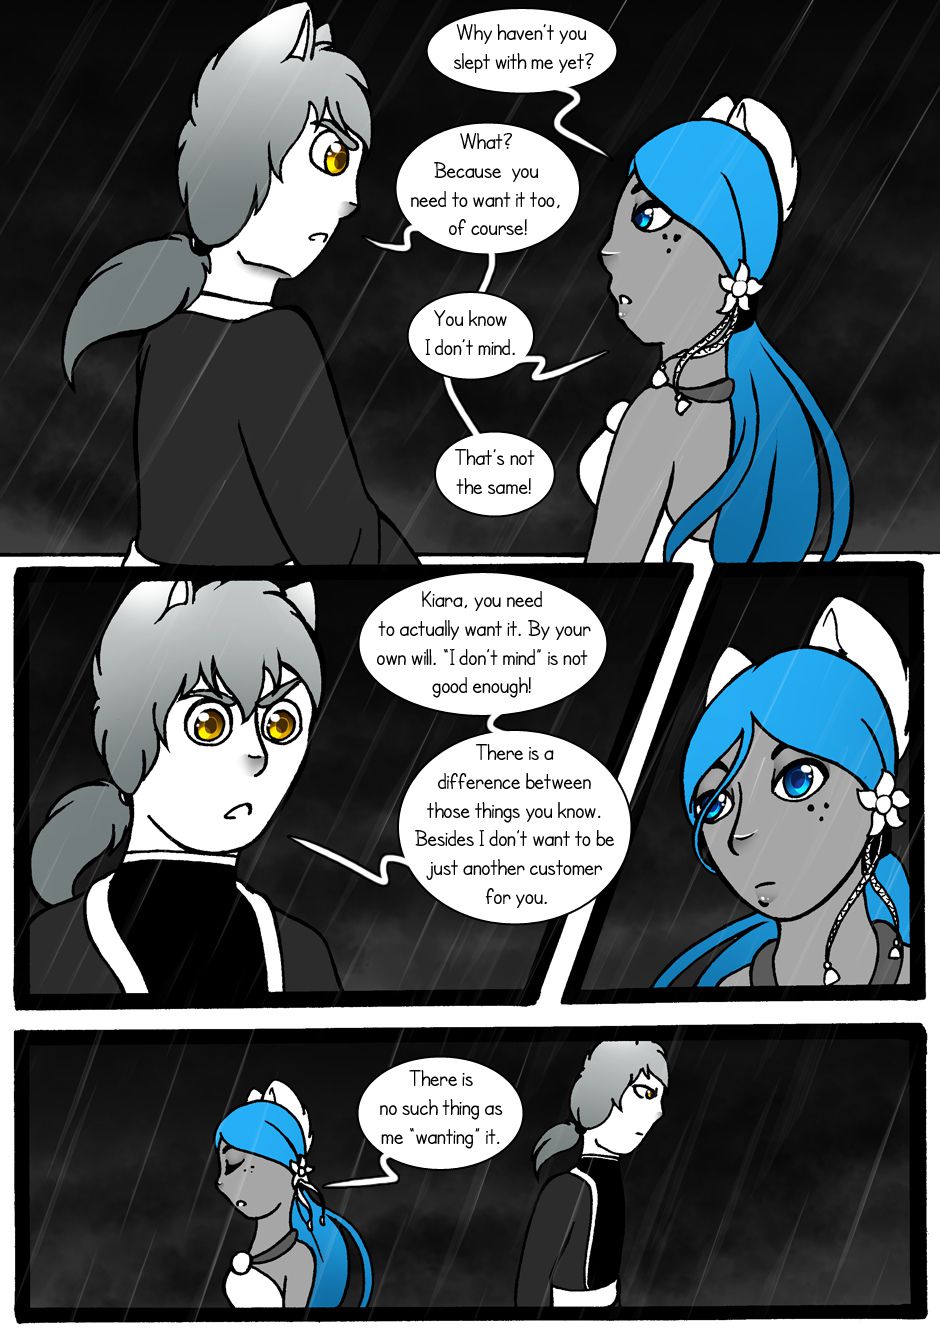 [Jeny-jen94] Between Kings and Queens [Ongoing] 126